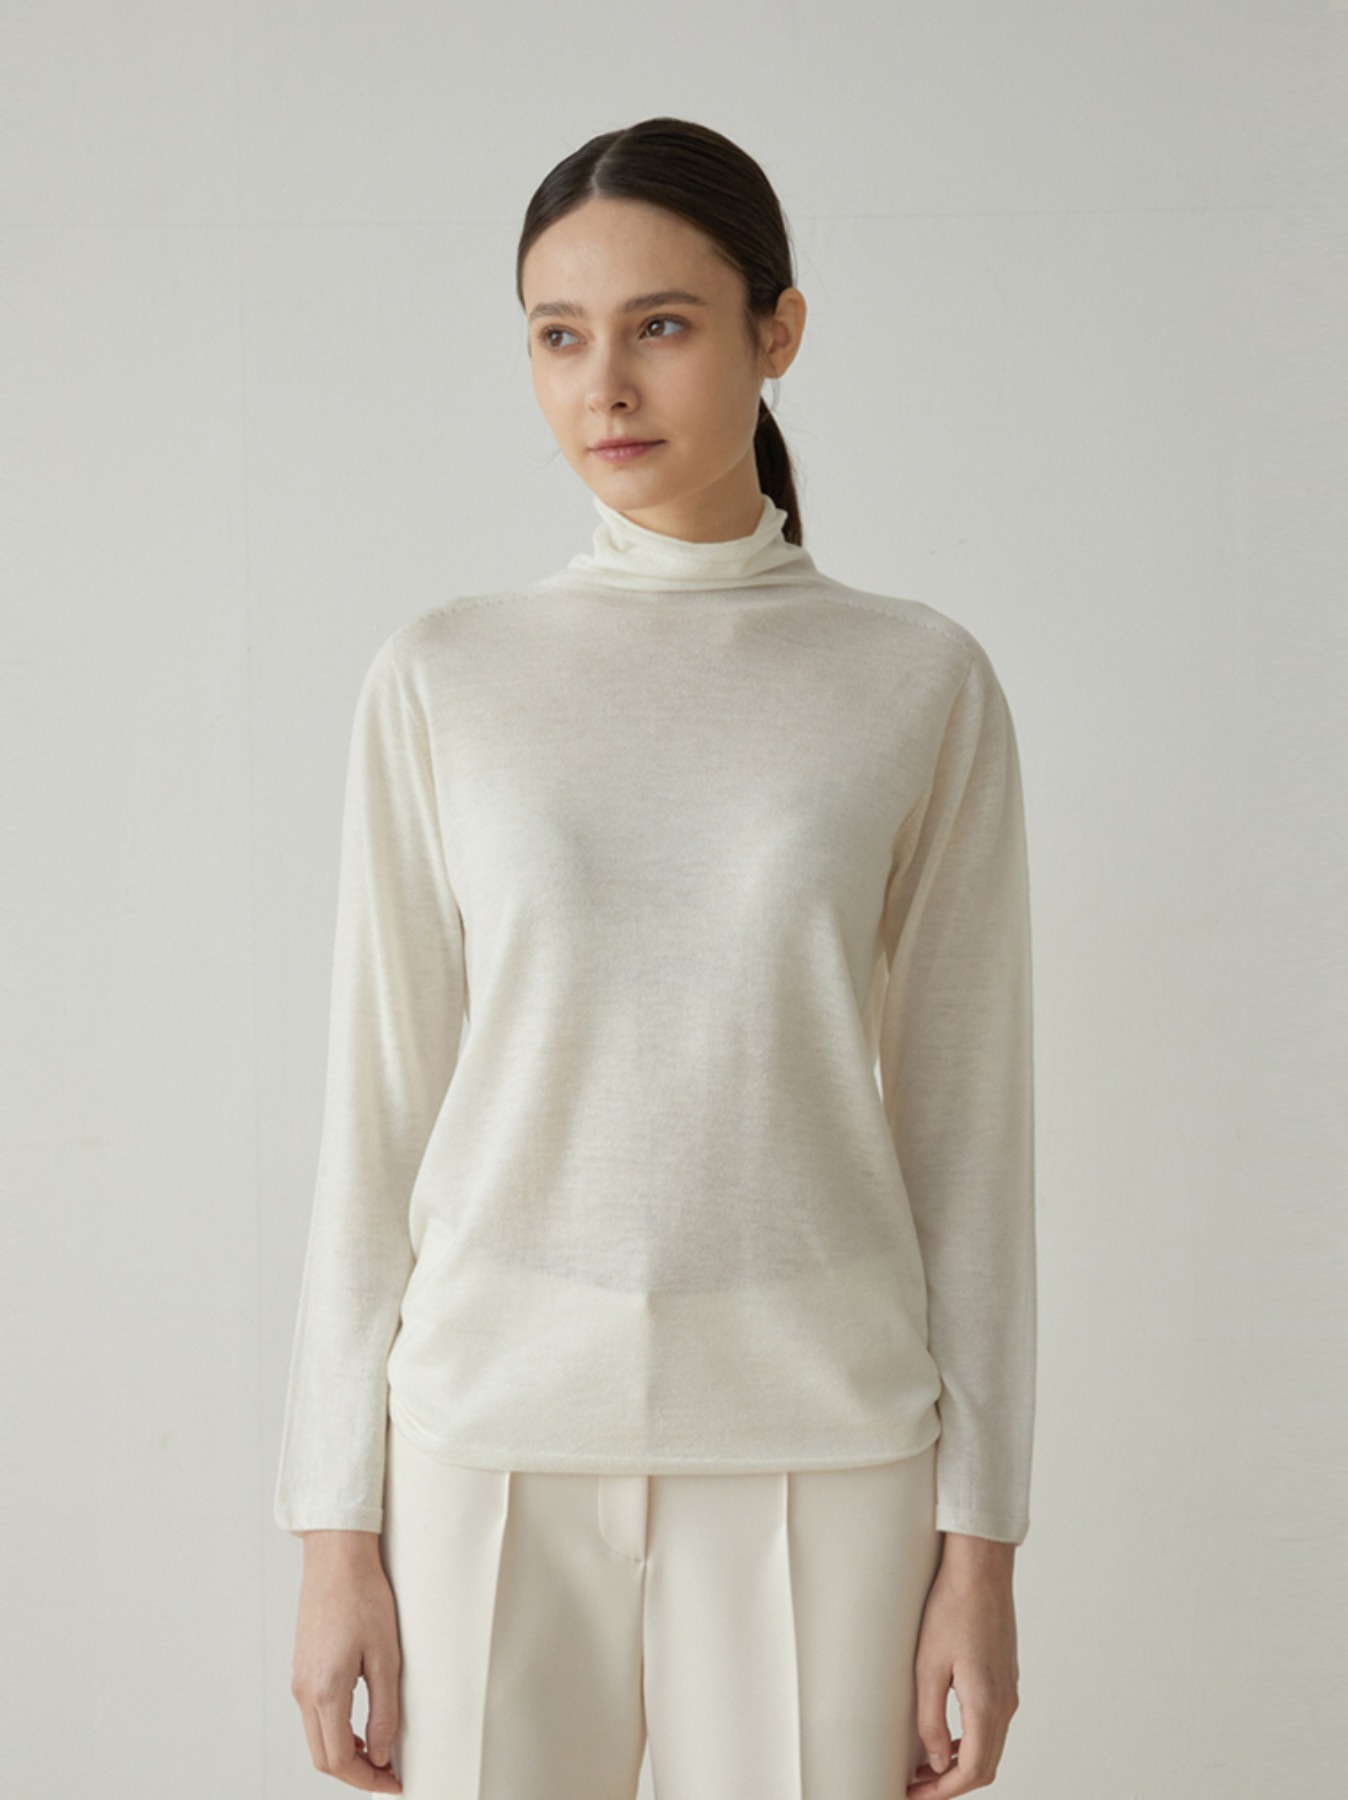 High-neck wholegarment pullover knit M3A604